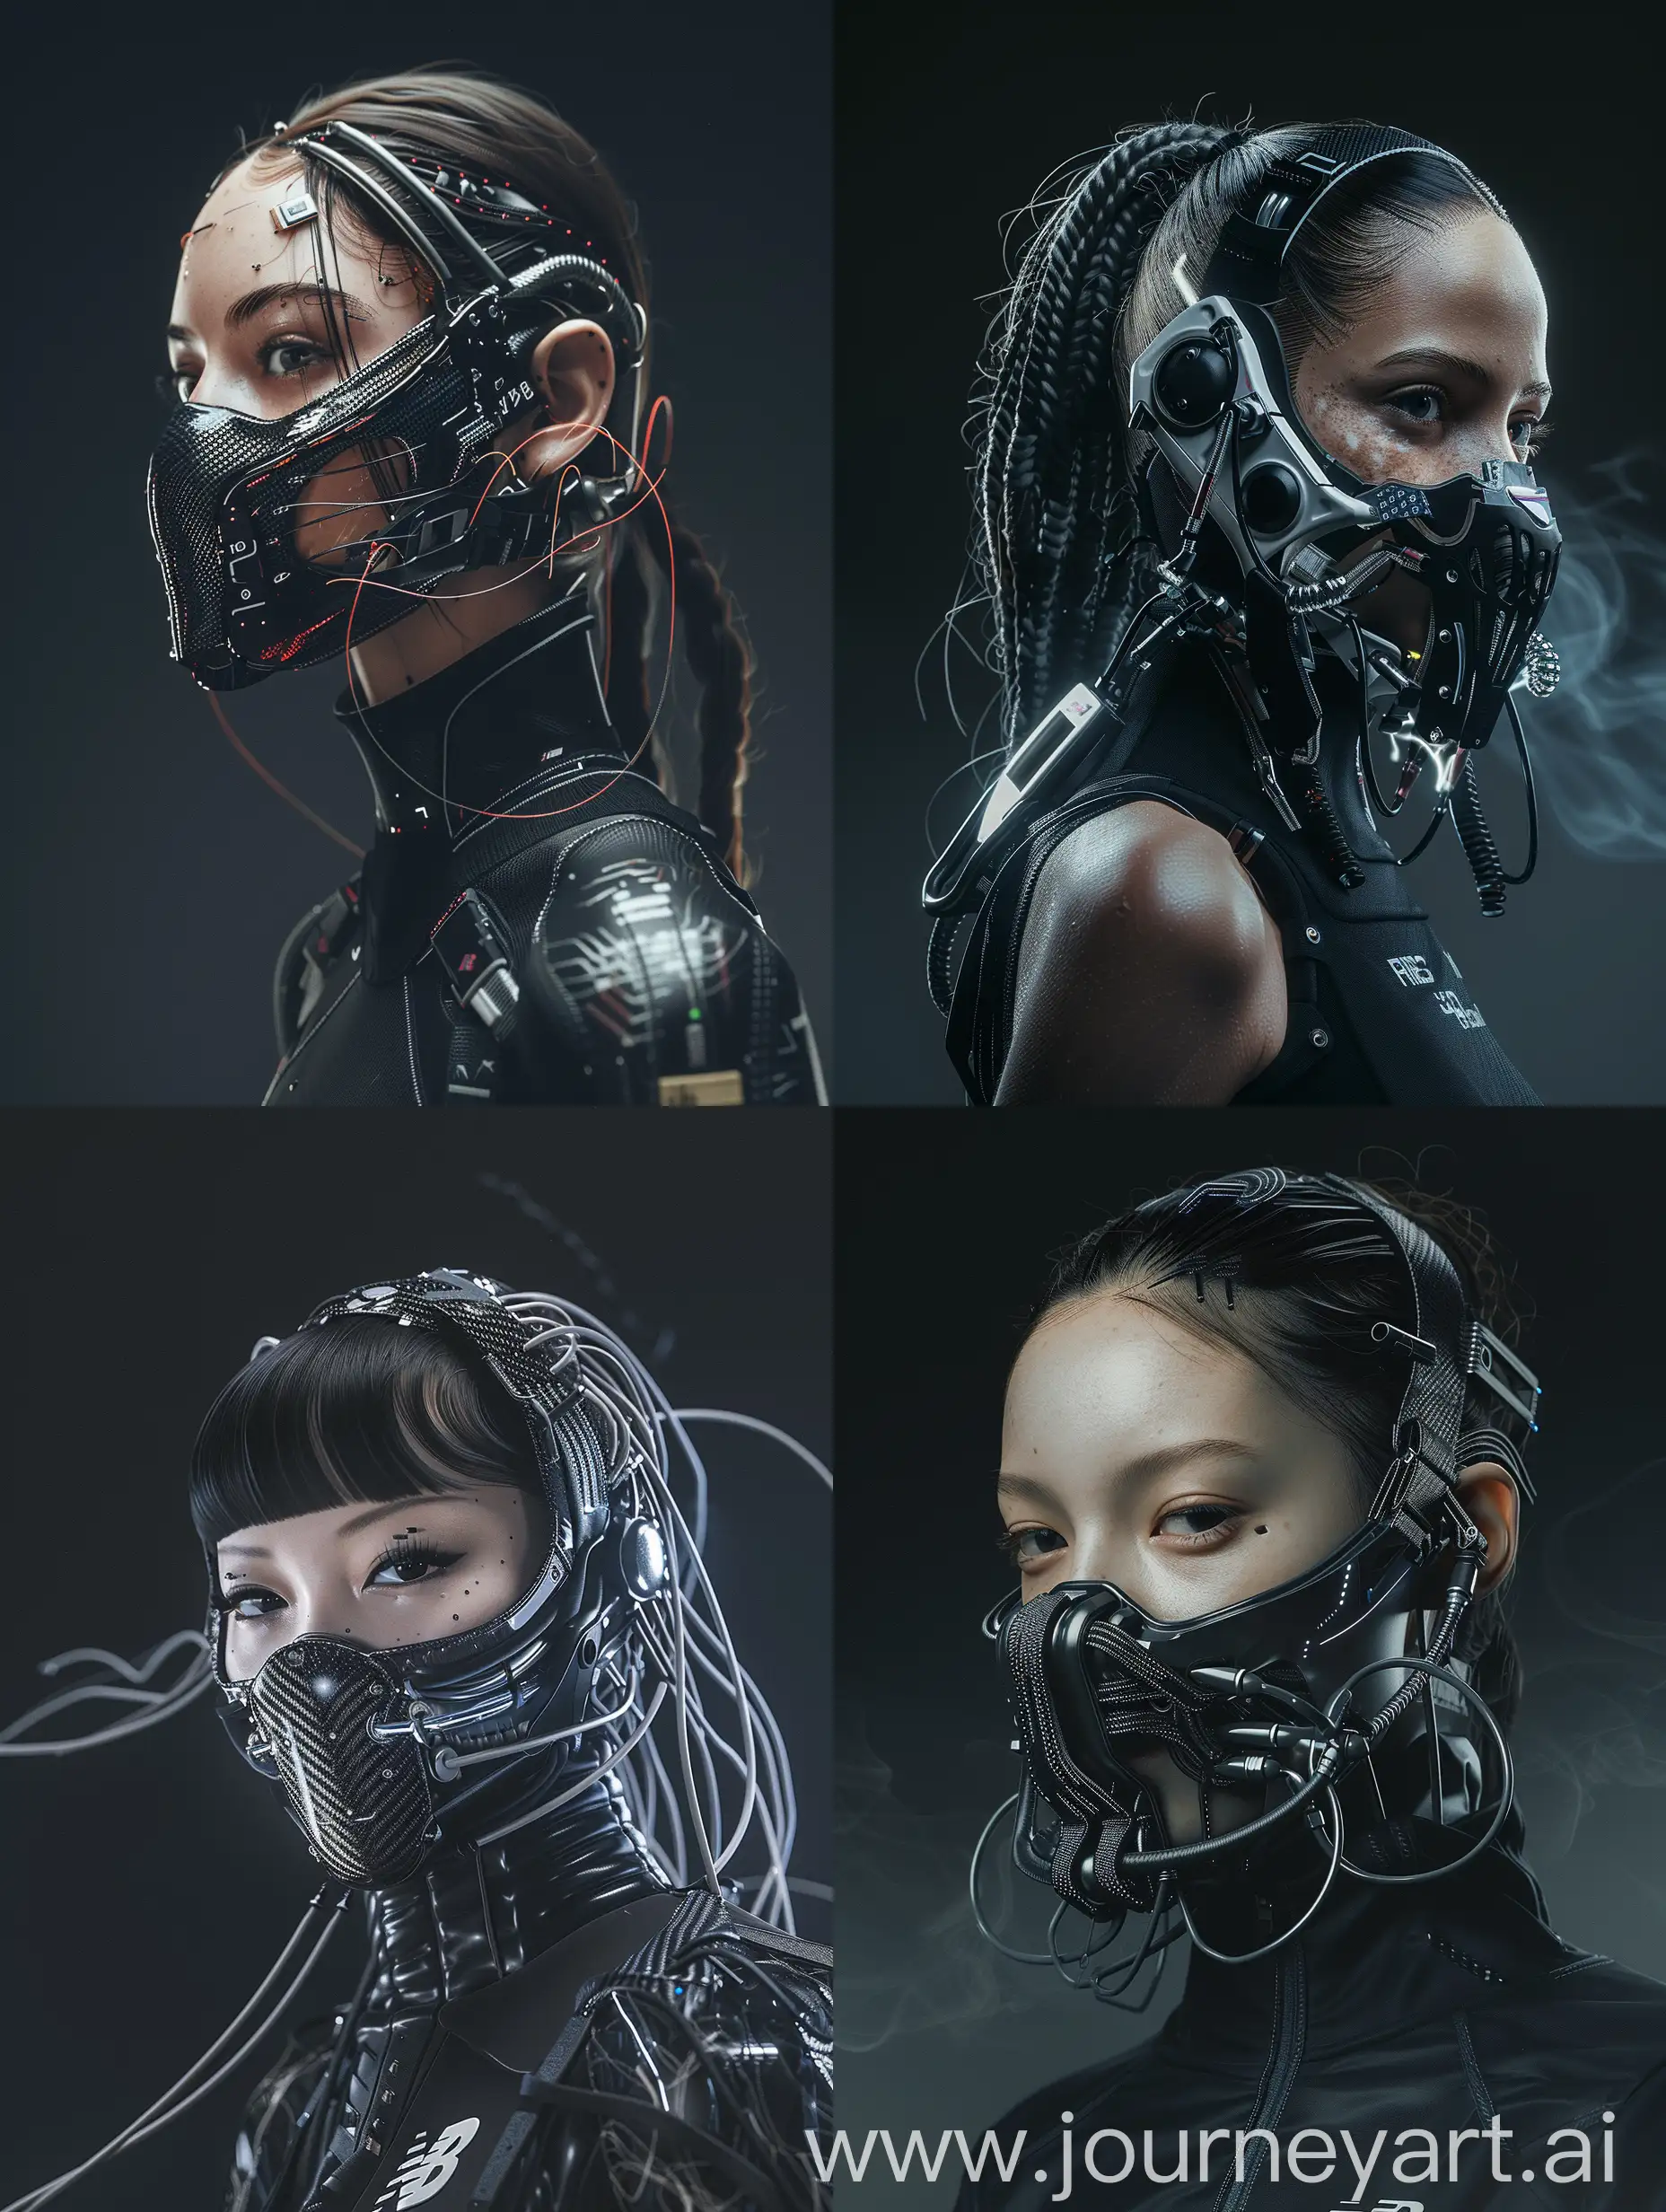 Futuristic-Cyberpunk-Character-with-Carbon-Fiber-Mask-and-New-Balanceinspired-Accents